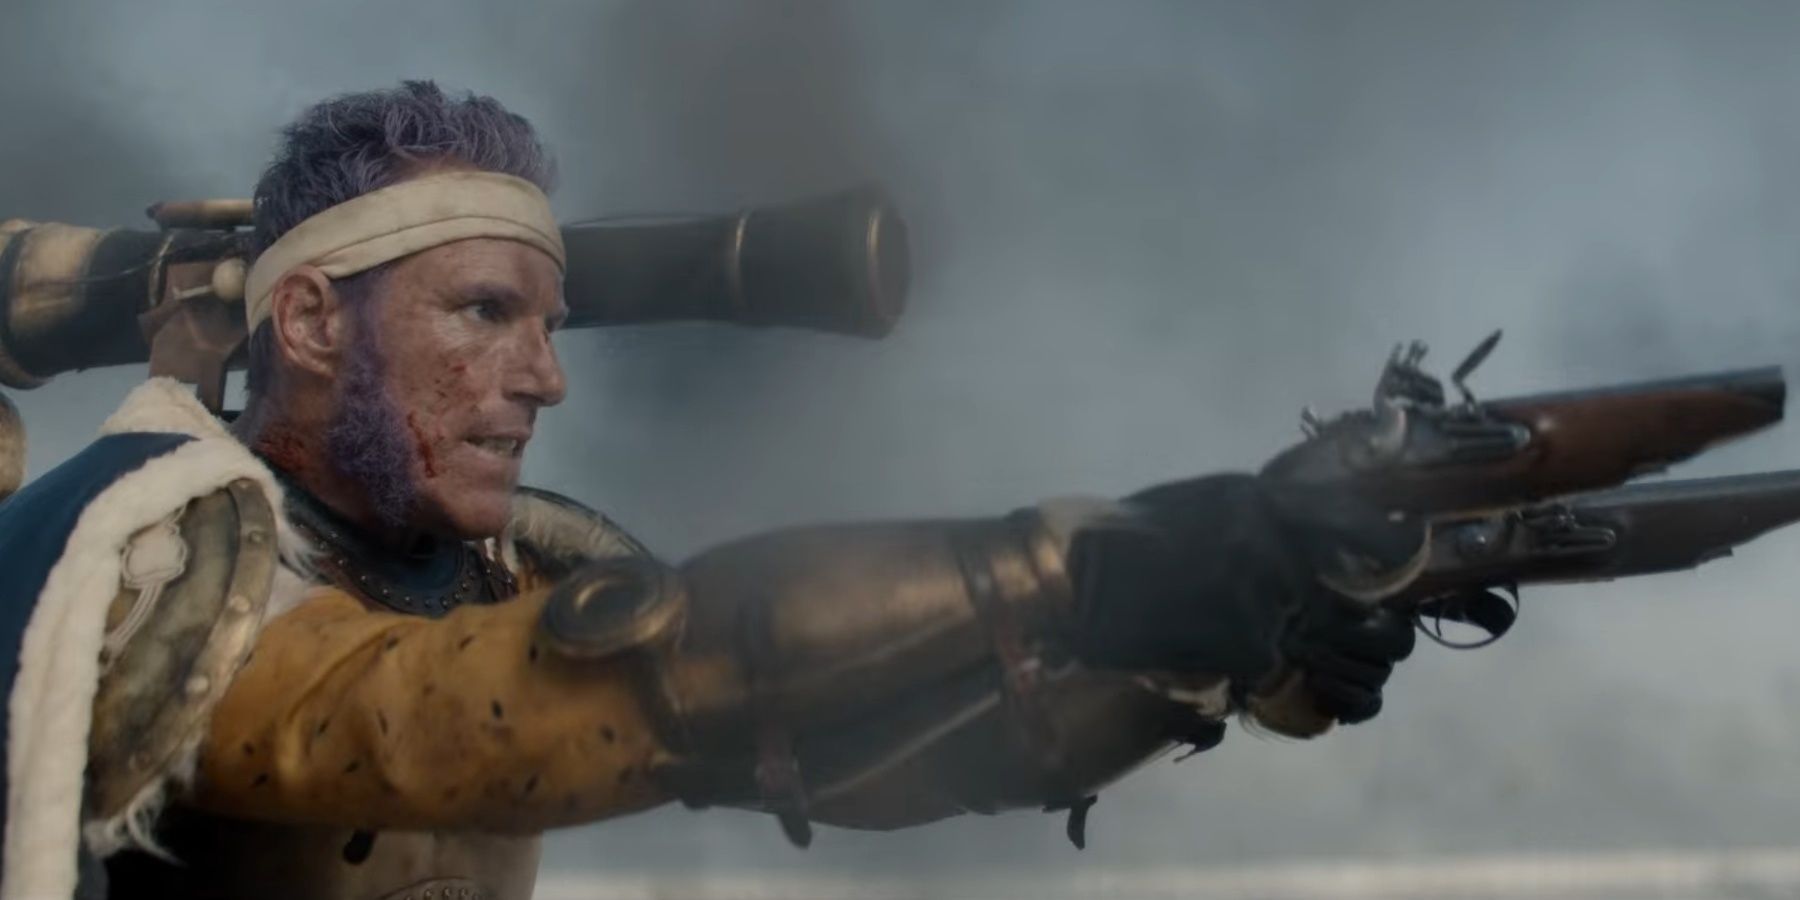 Don Krieg fires his pistols at Mihawk in the live-action One Piece adapation.